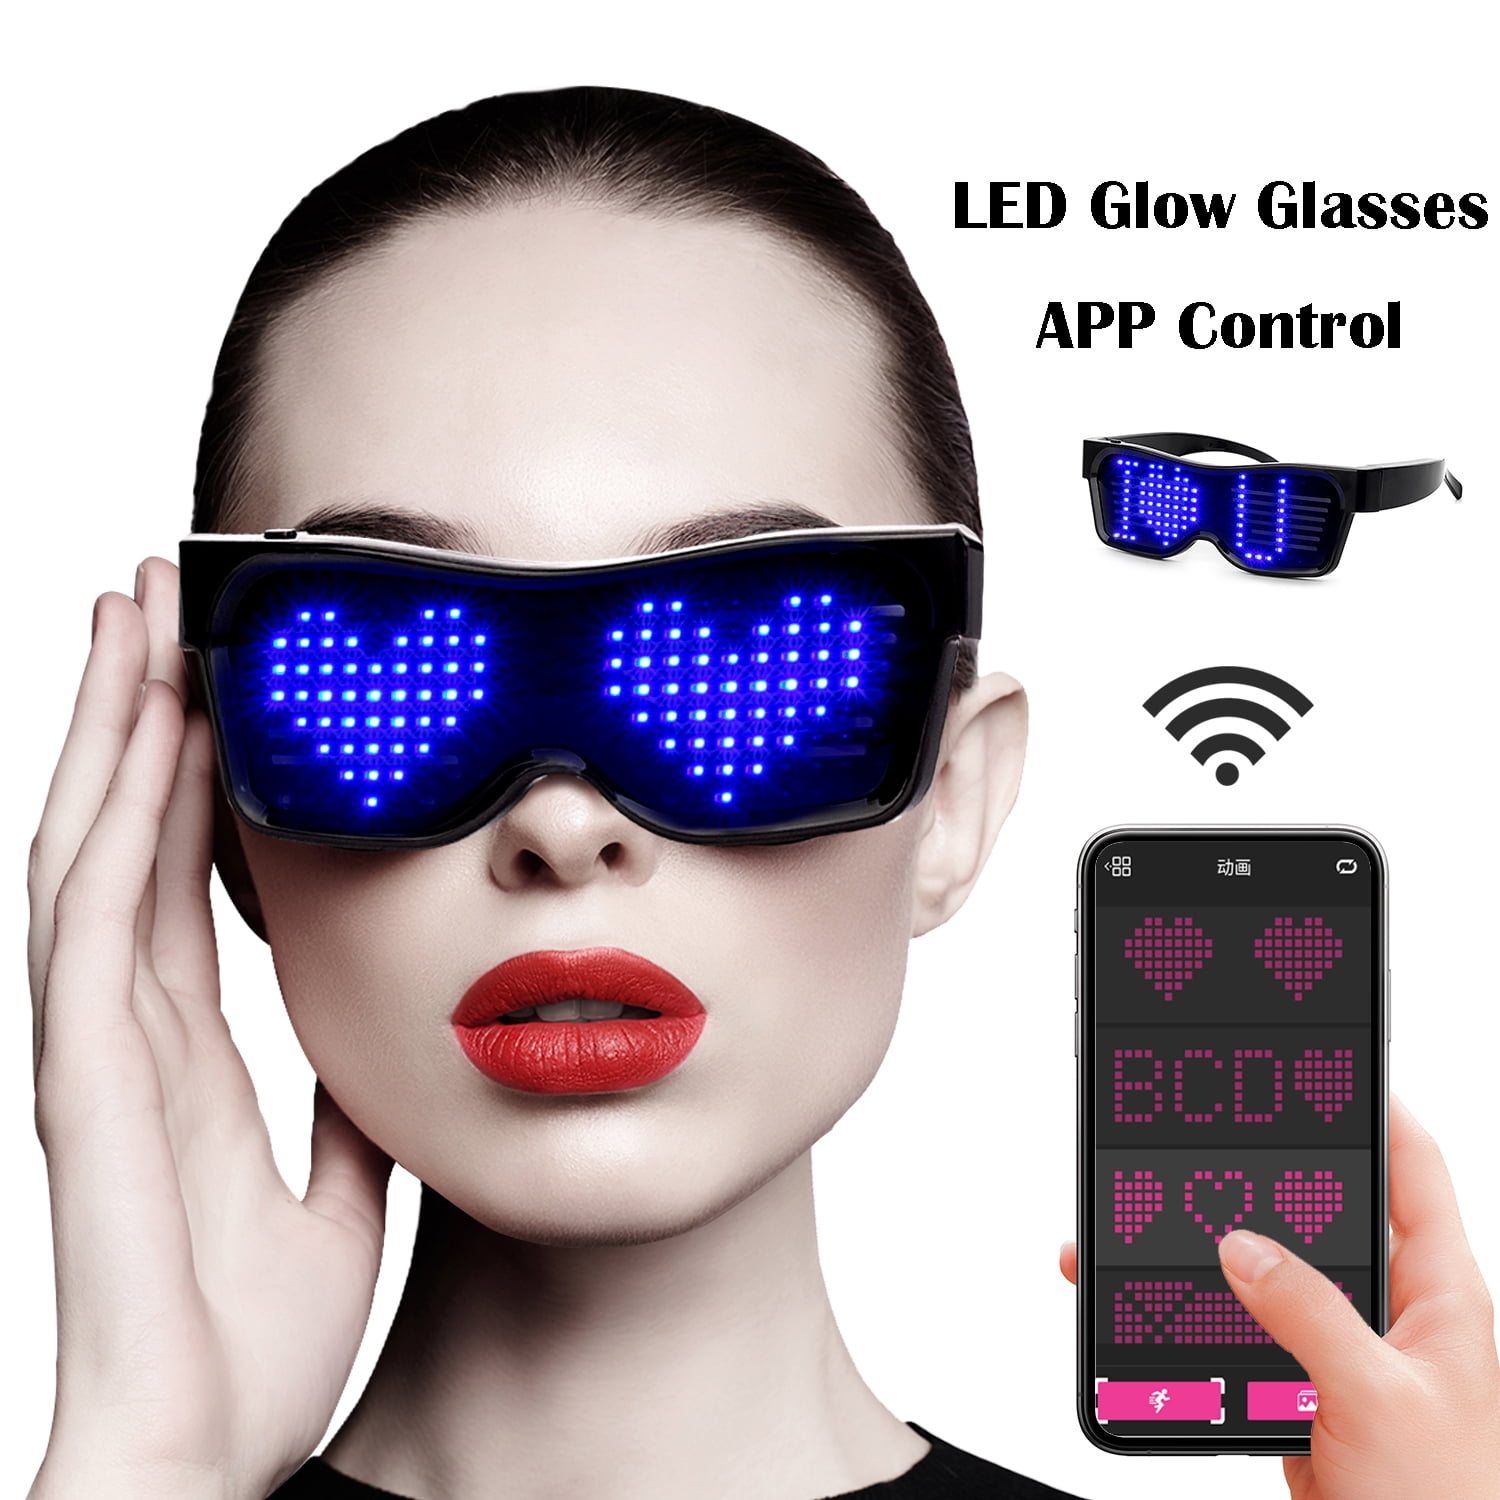 Leadleds Smart Led Glasses Bluetooth App Control Animation Text  Programmable Led Light Up for Party Club DJ Halloween Gifts (White)